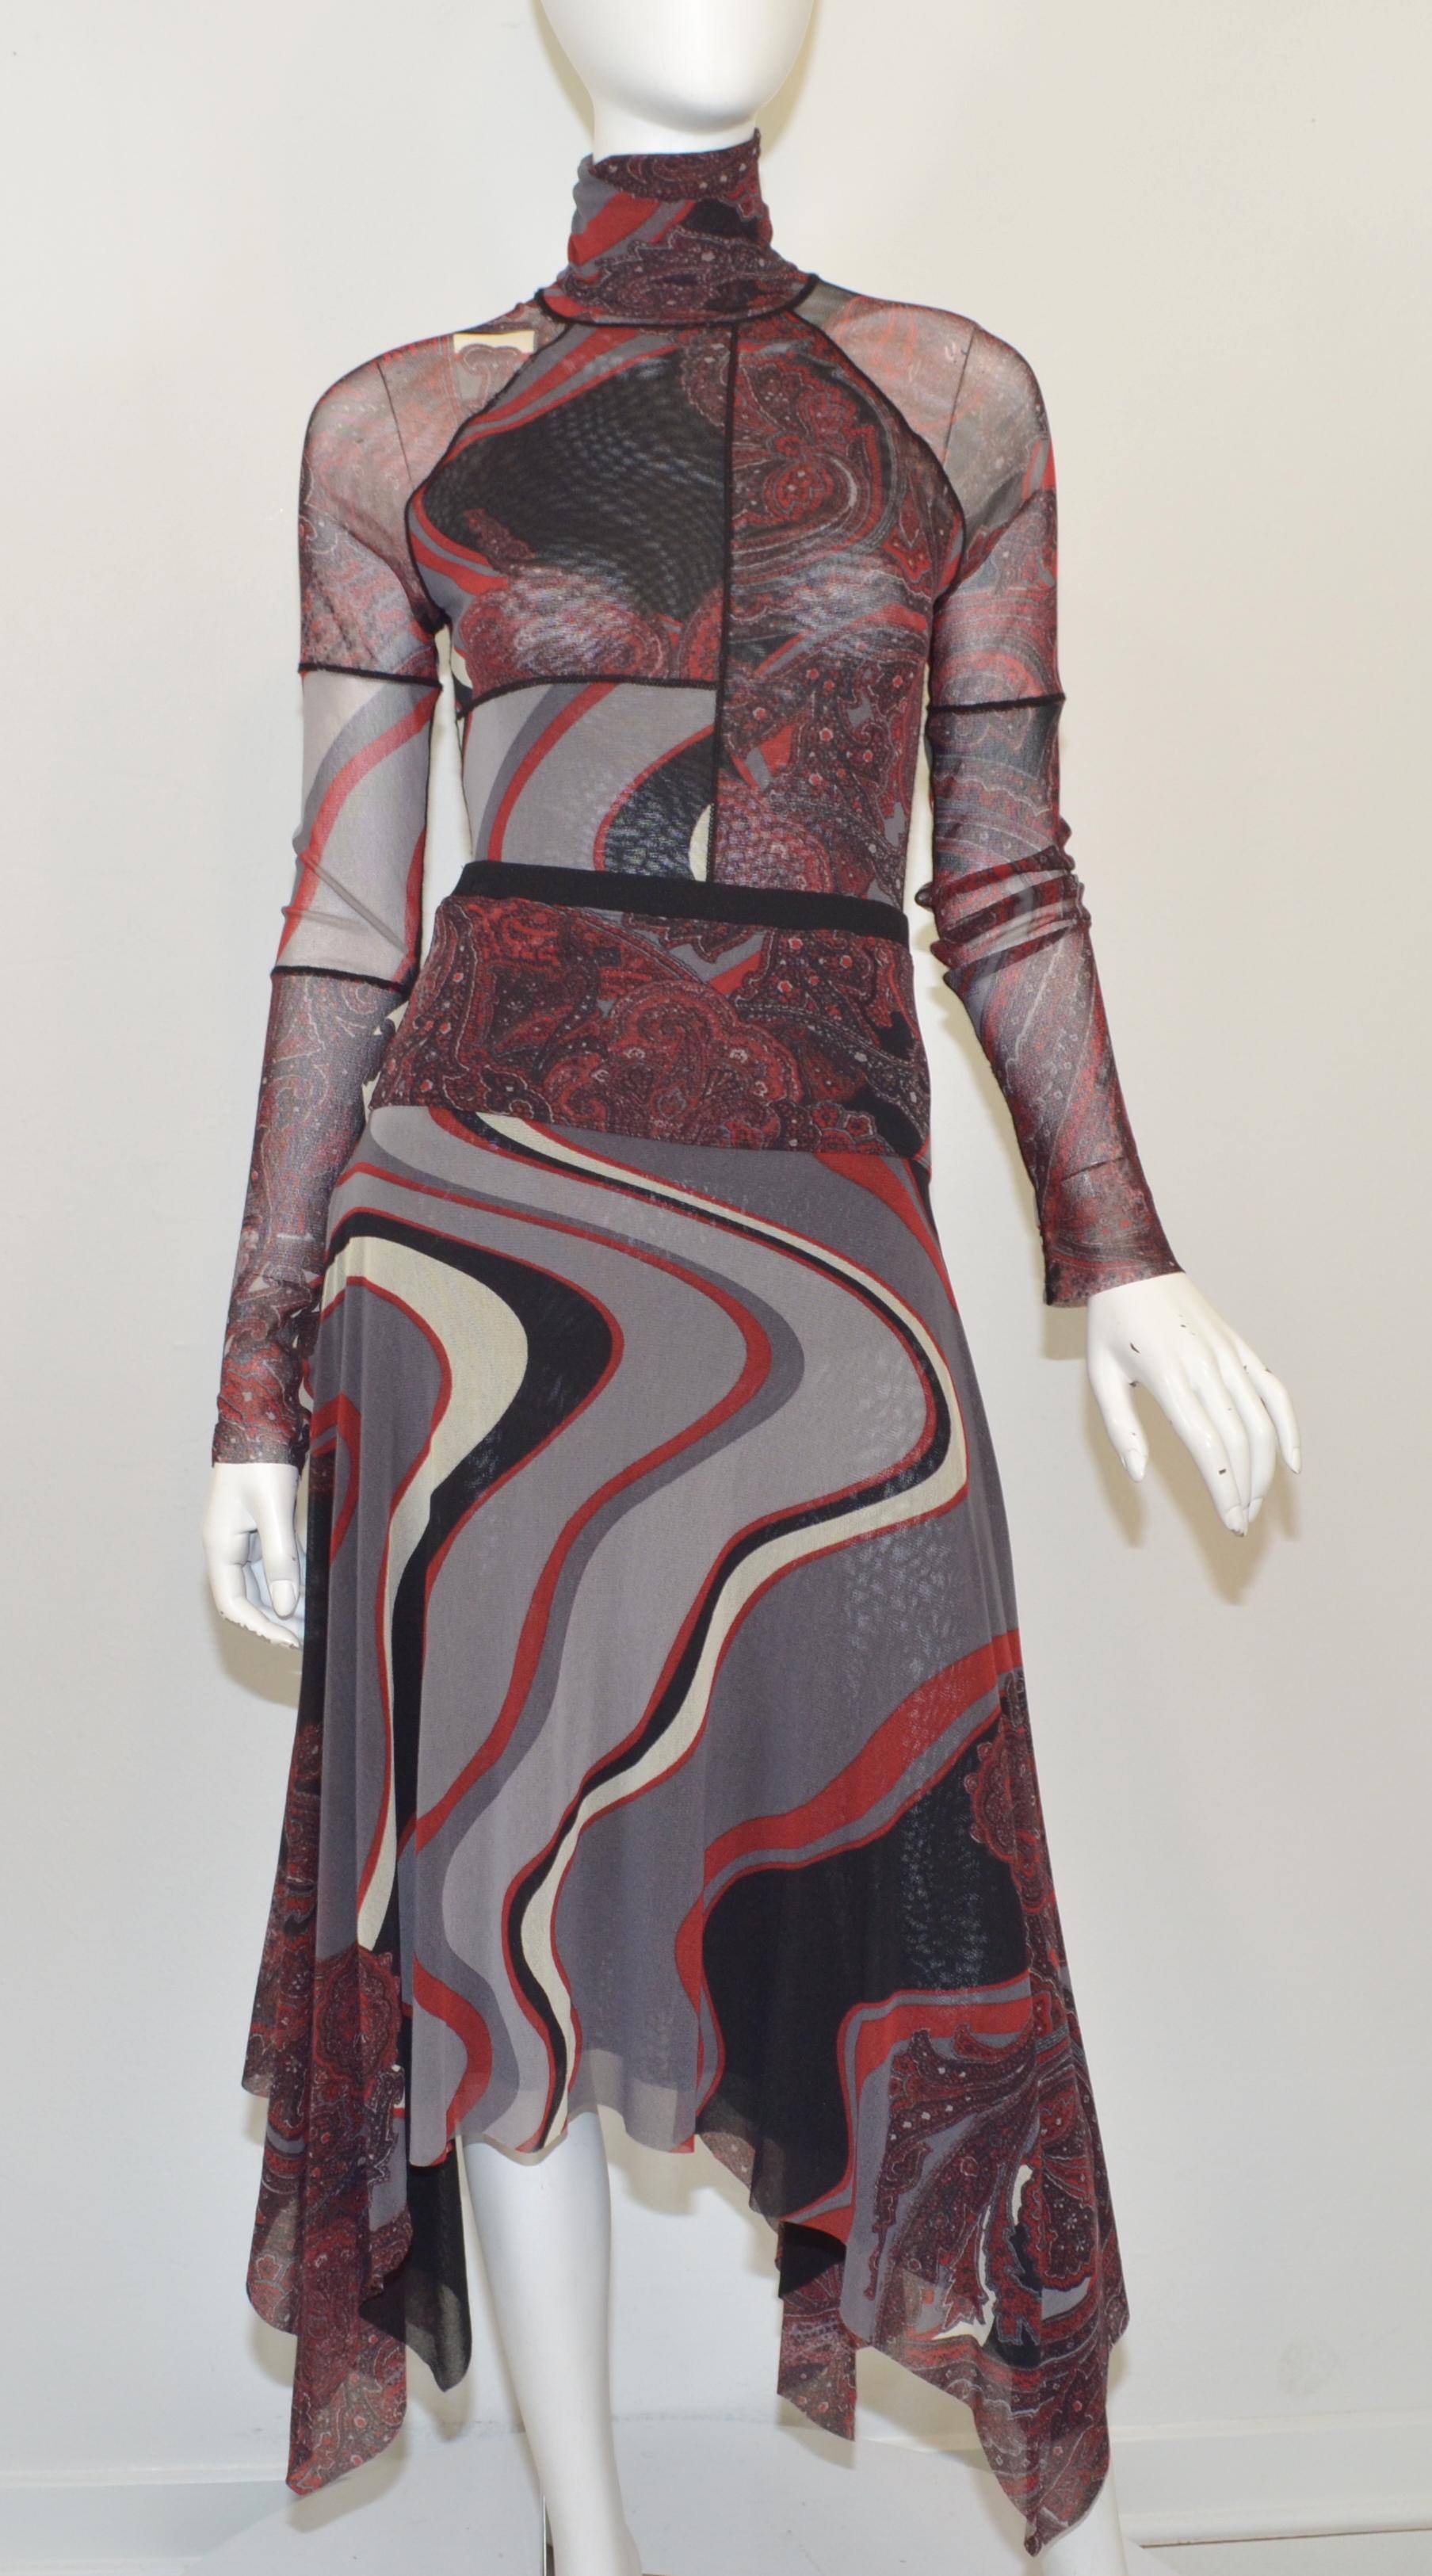 Jean Paul Gaultier set features a maroon, black and grey mixed print thourhgout a nylon mesh knit fabric. Skirt has an elasticized waist band and a handkerchief cut hem. Top is a size M and skirt is a size S, composed with 100% nylon, made in